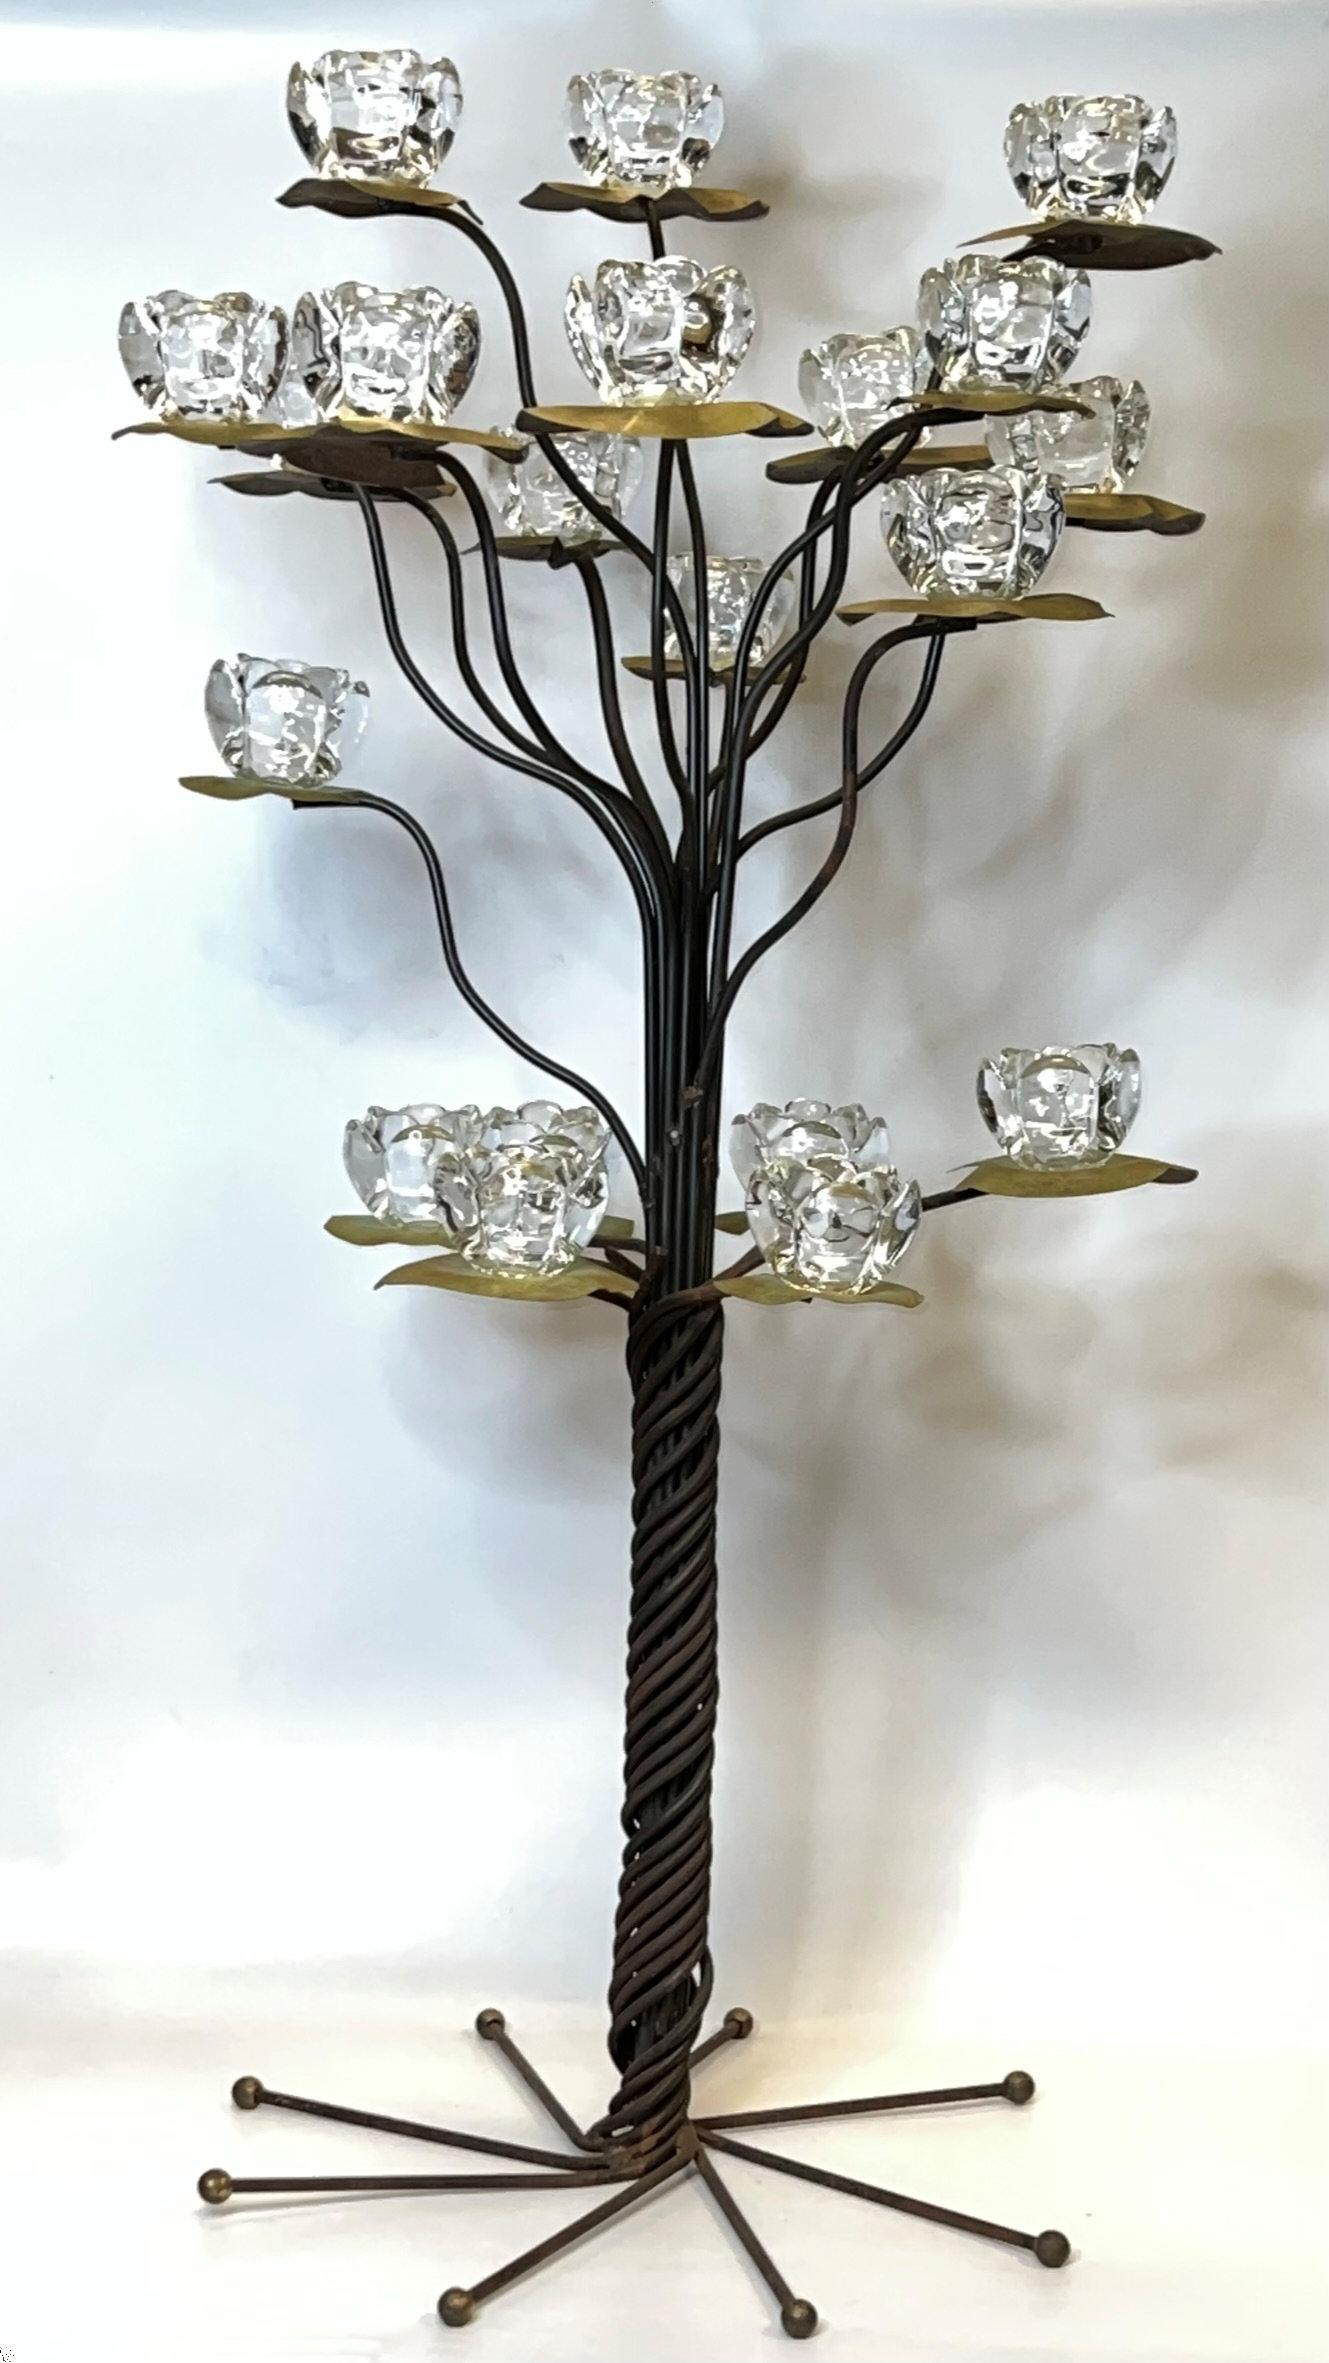 Mid-Century Modern Iron and Copper Floor Candelabra with Crystal Candle Holders For Sale 5